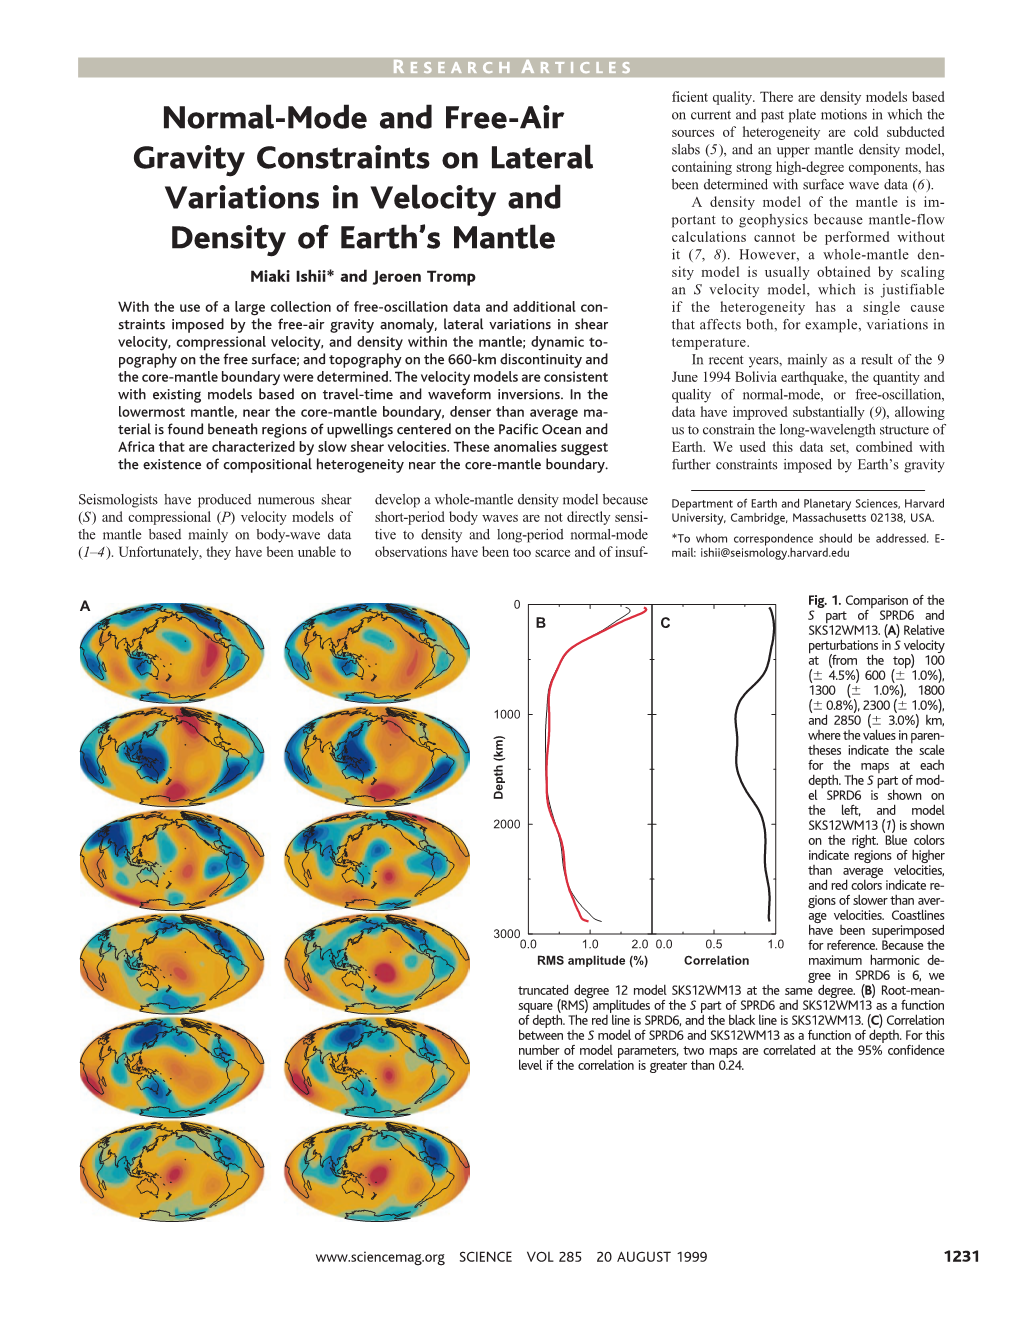 Normal-Mode and Free-Air Gravity Constraints on Lateral Variations In